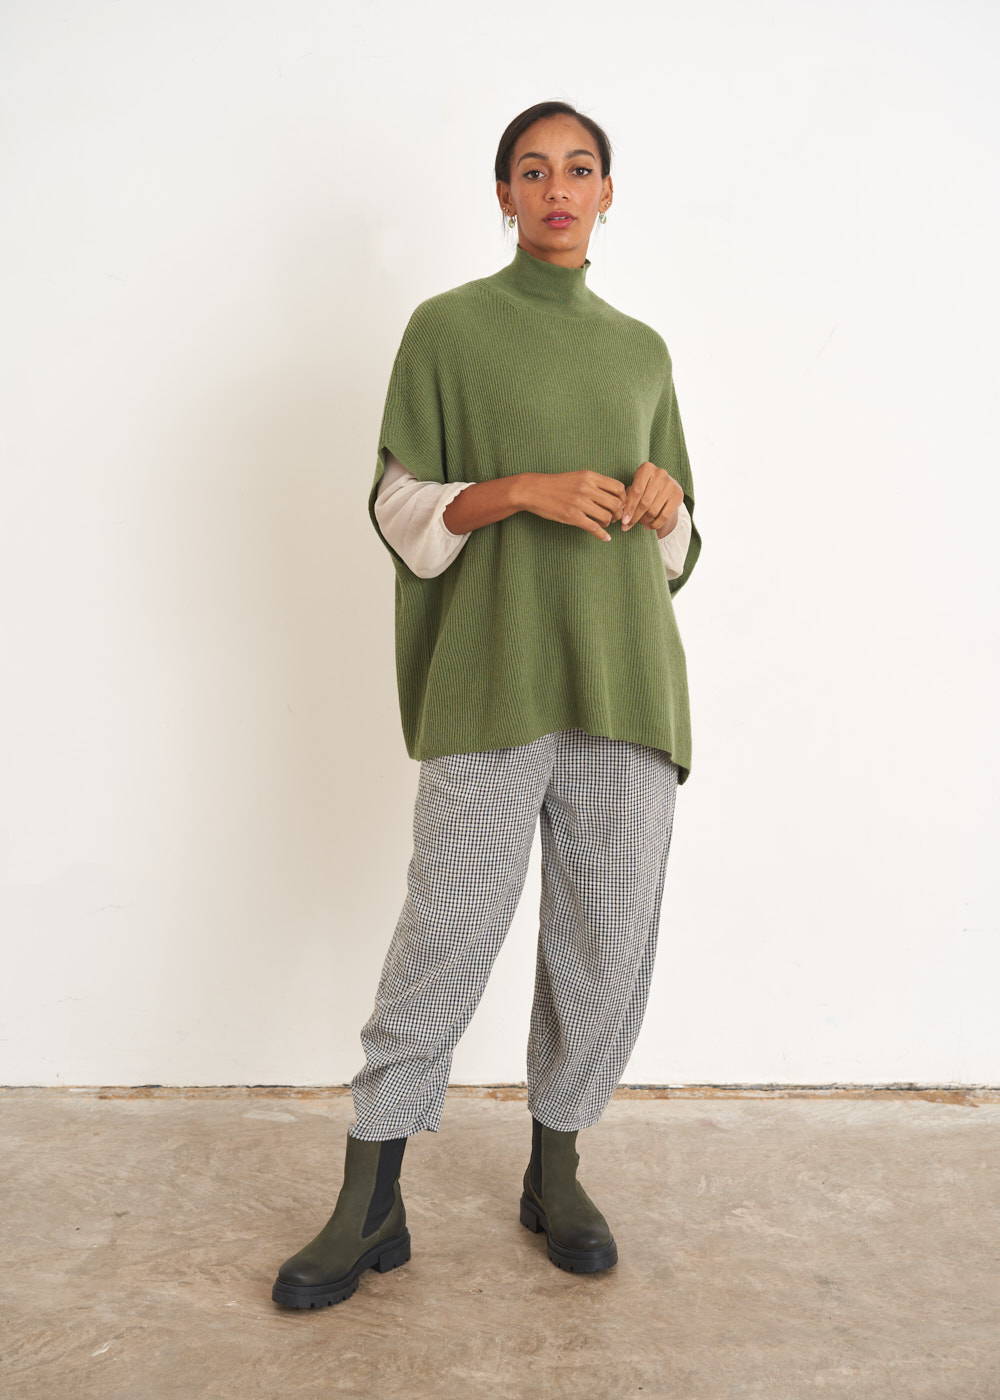 A model wearing a green knitted sleeveless sweater with a turtle neck over an off white shirt, grey checked trousers and khaki green chelsea boots